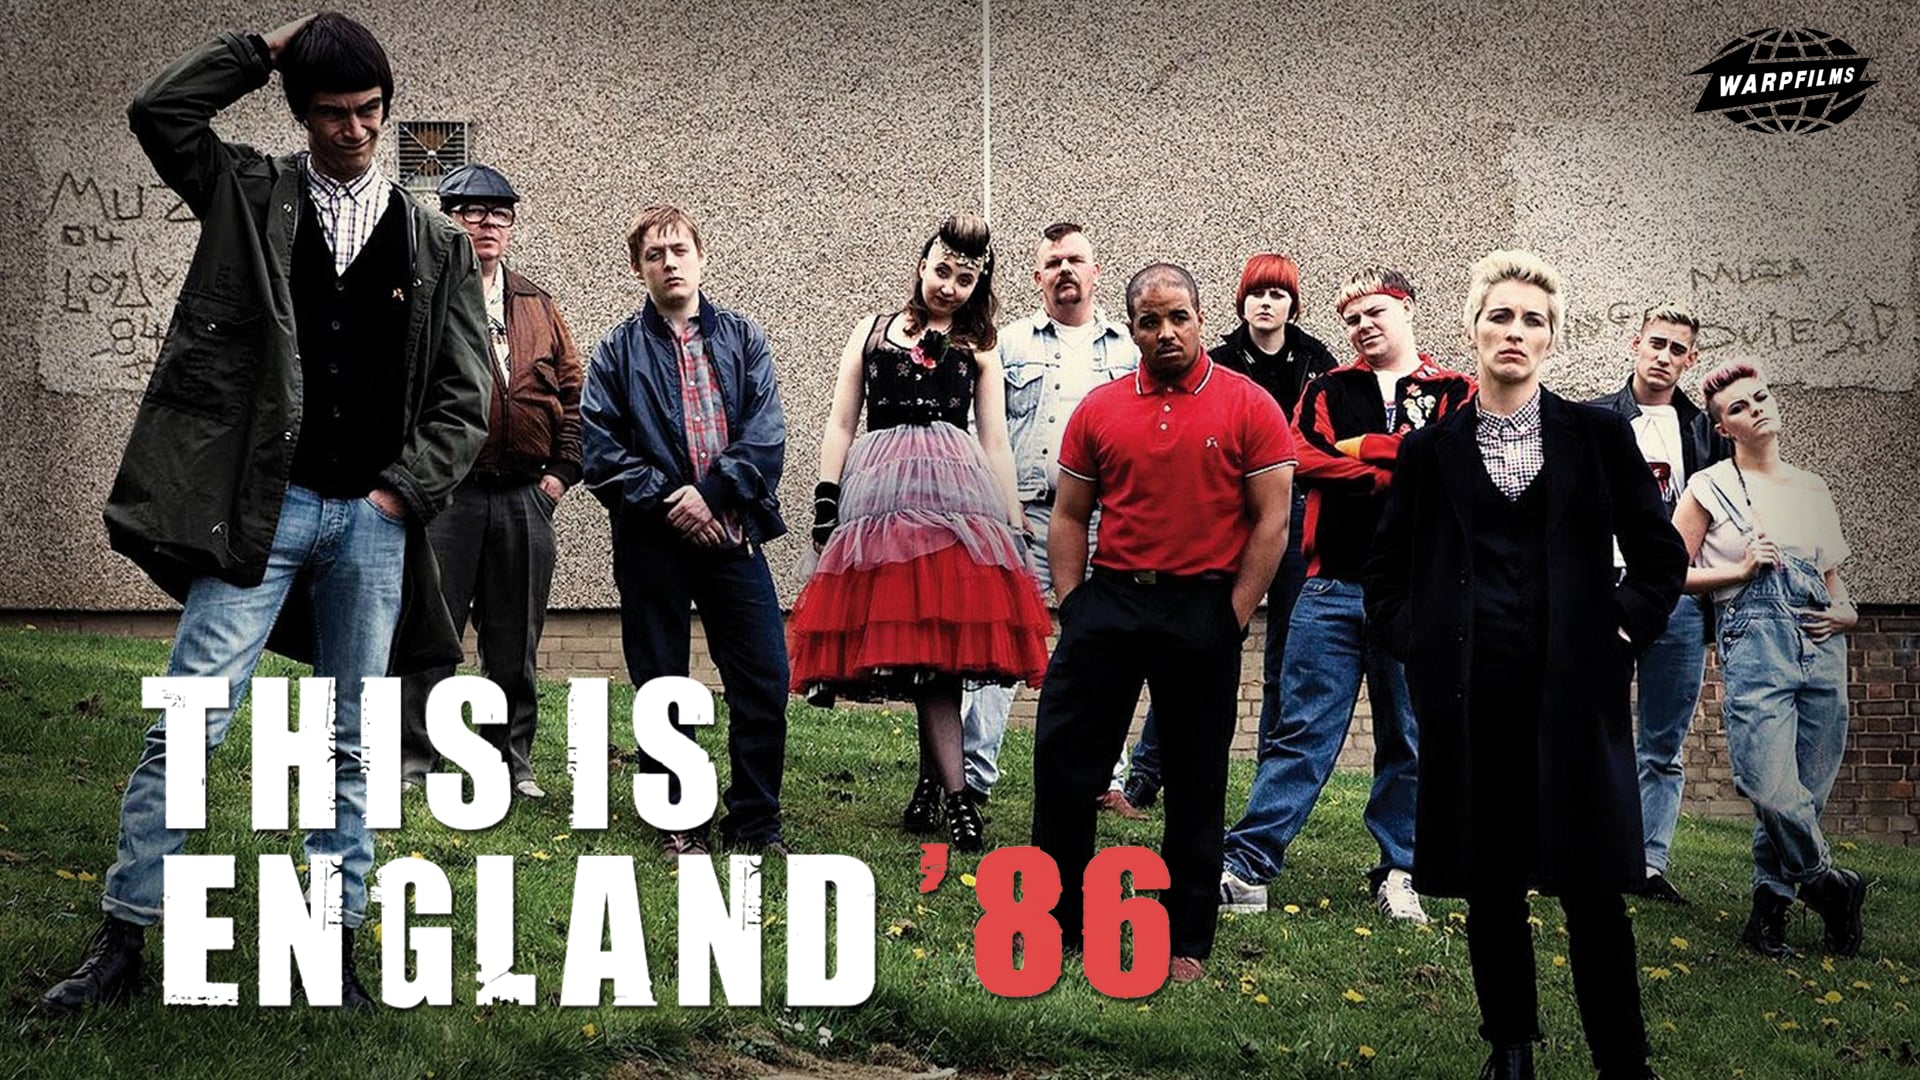 This Is England 86' (Channel 4 Promo)